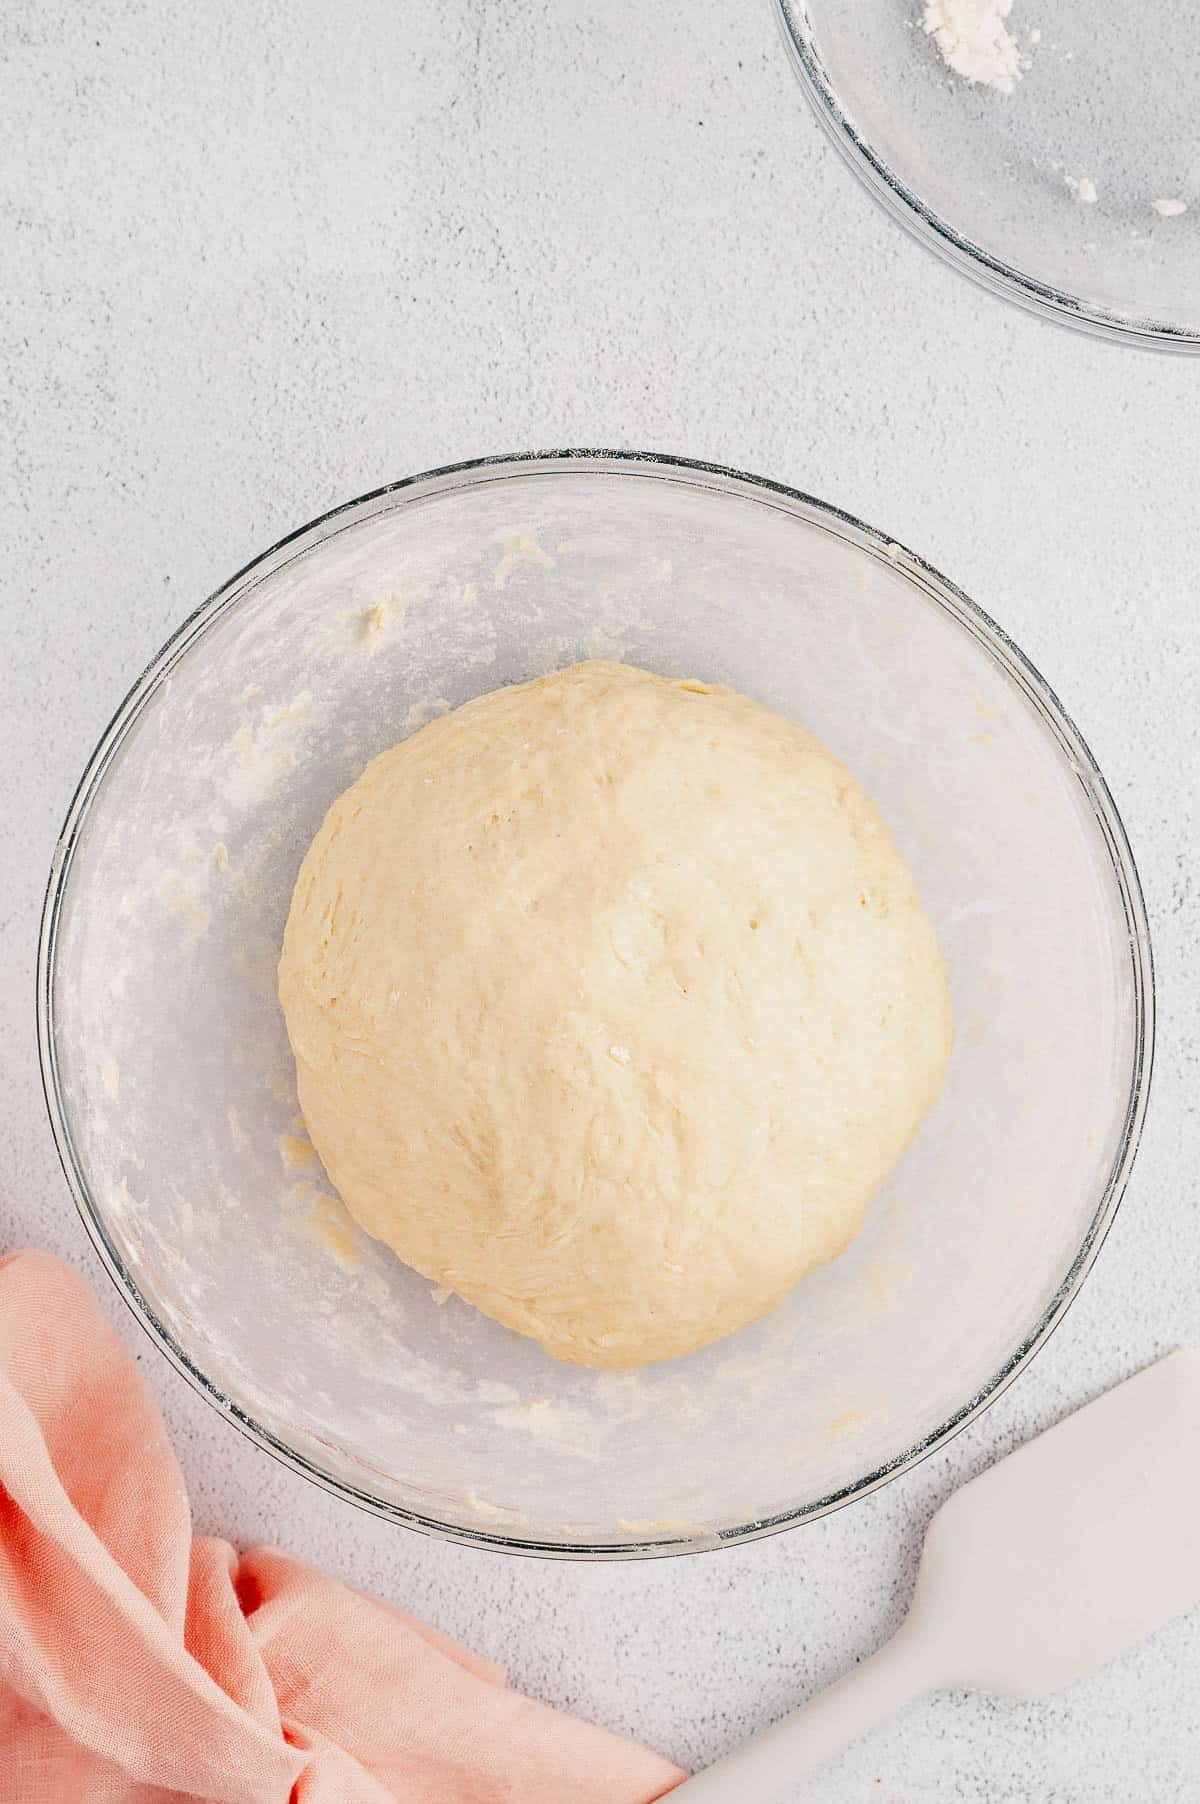 A ball of cinnamon roll dough in the bottom of a glass bowl.